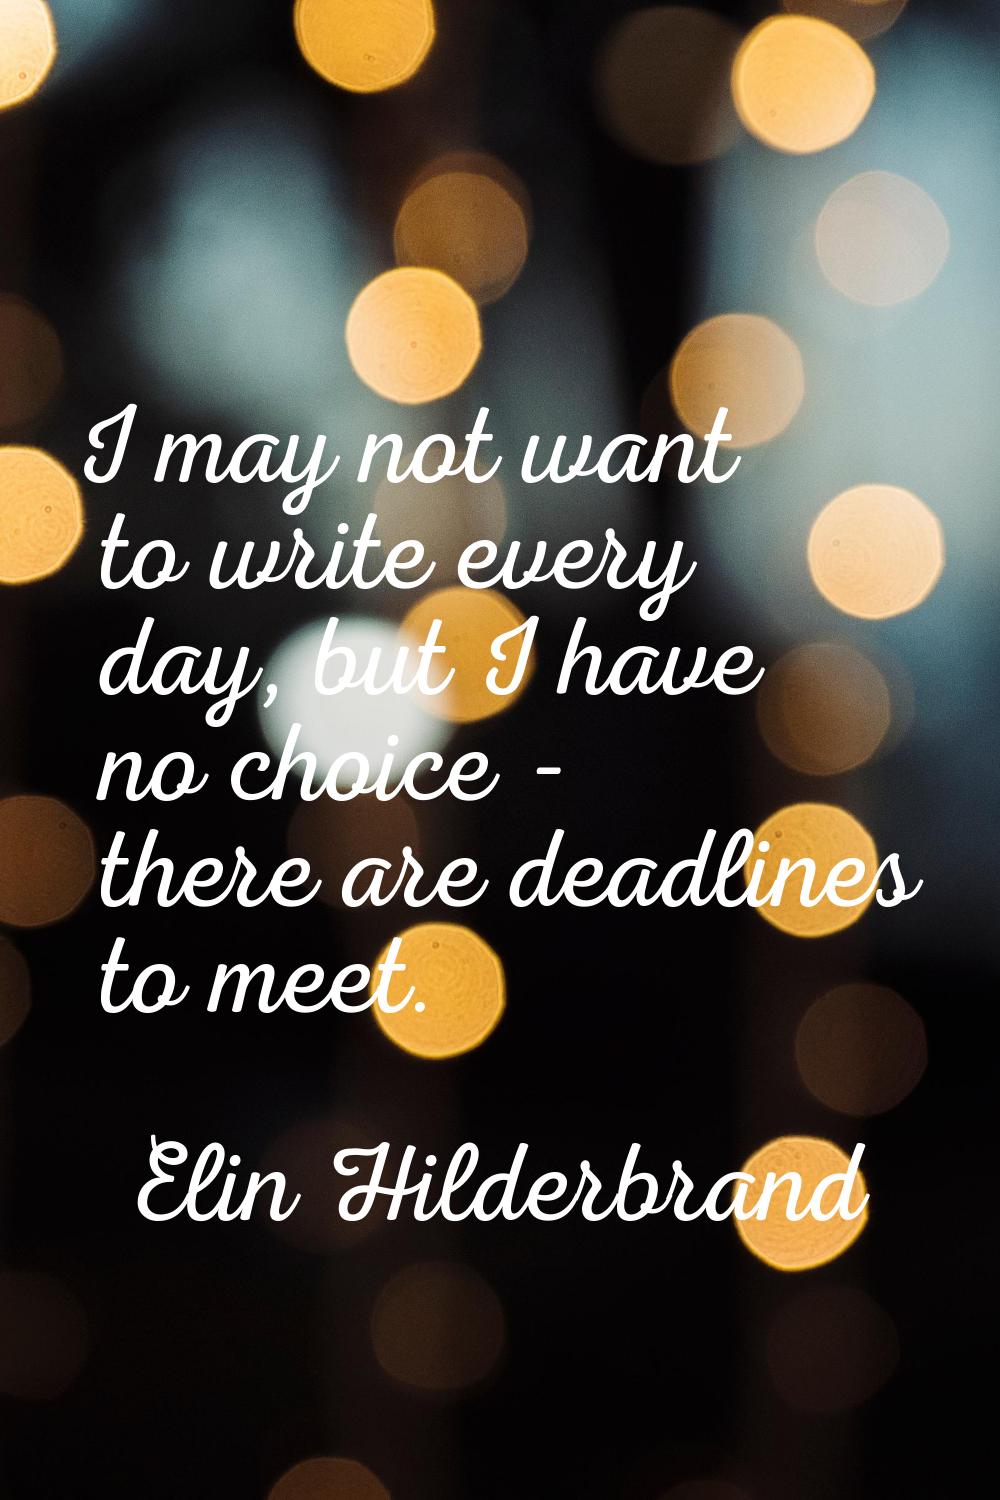 I may not want to write every day, but I have no choice - there are deadlines to meet.